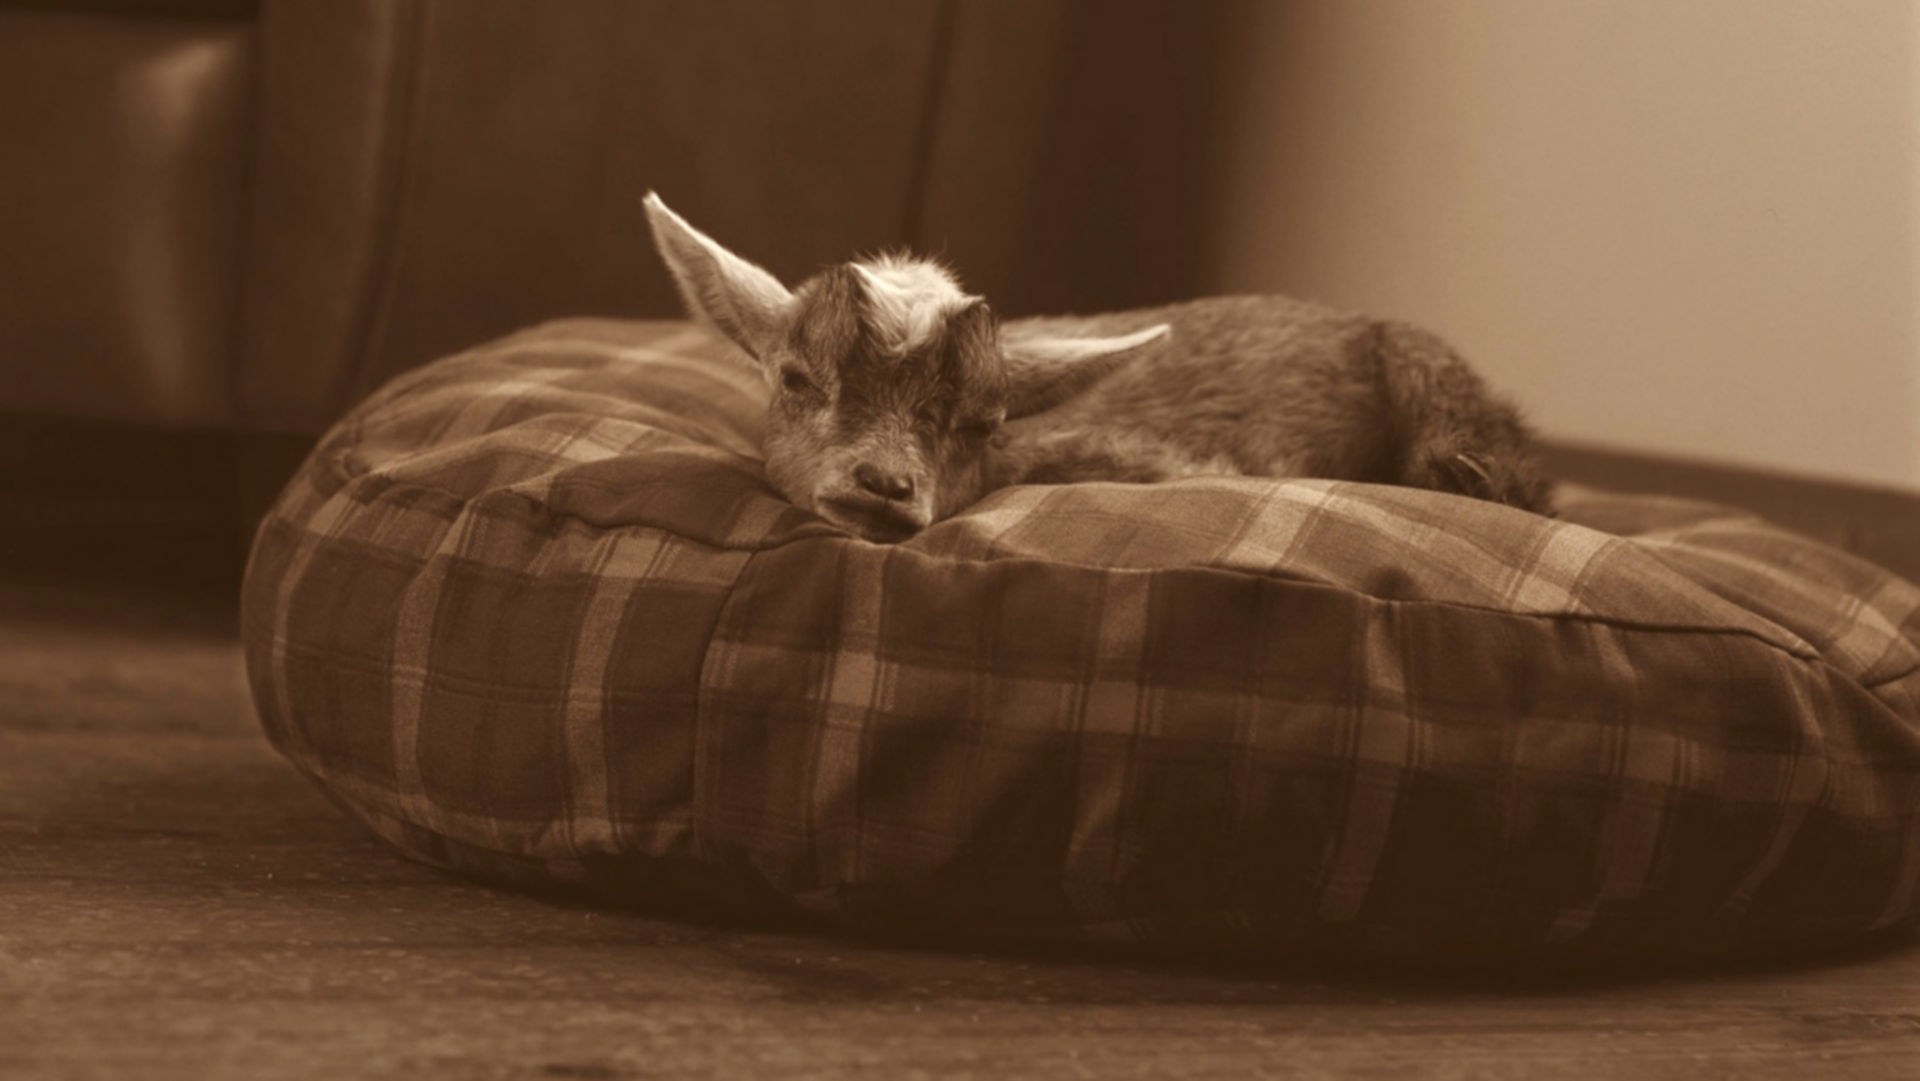 Perk Perkins's goat Williams sleeping on a round plaid dog bed.